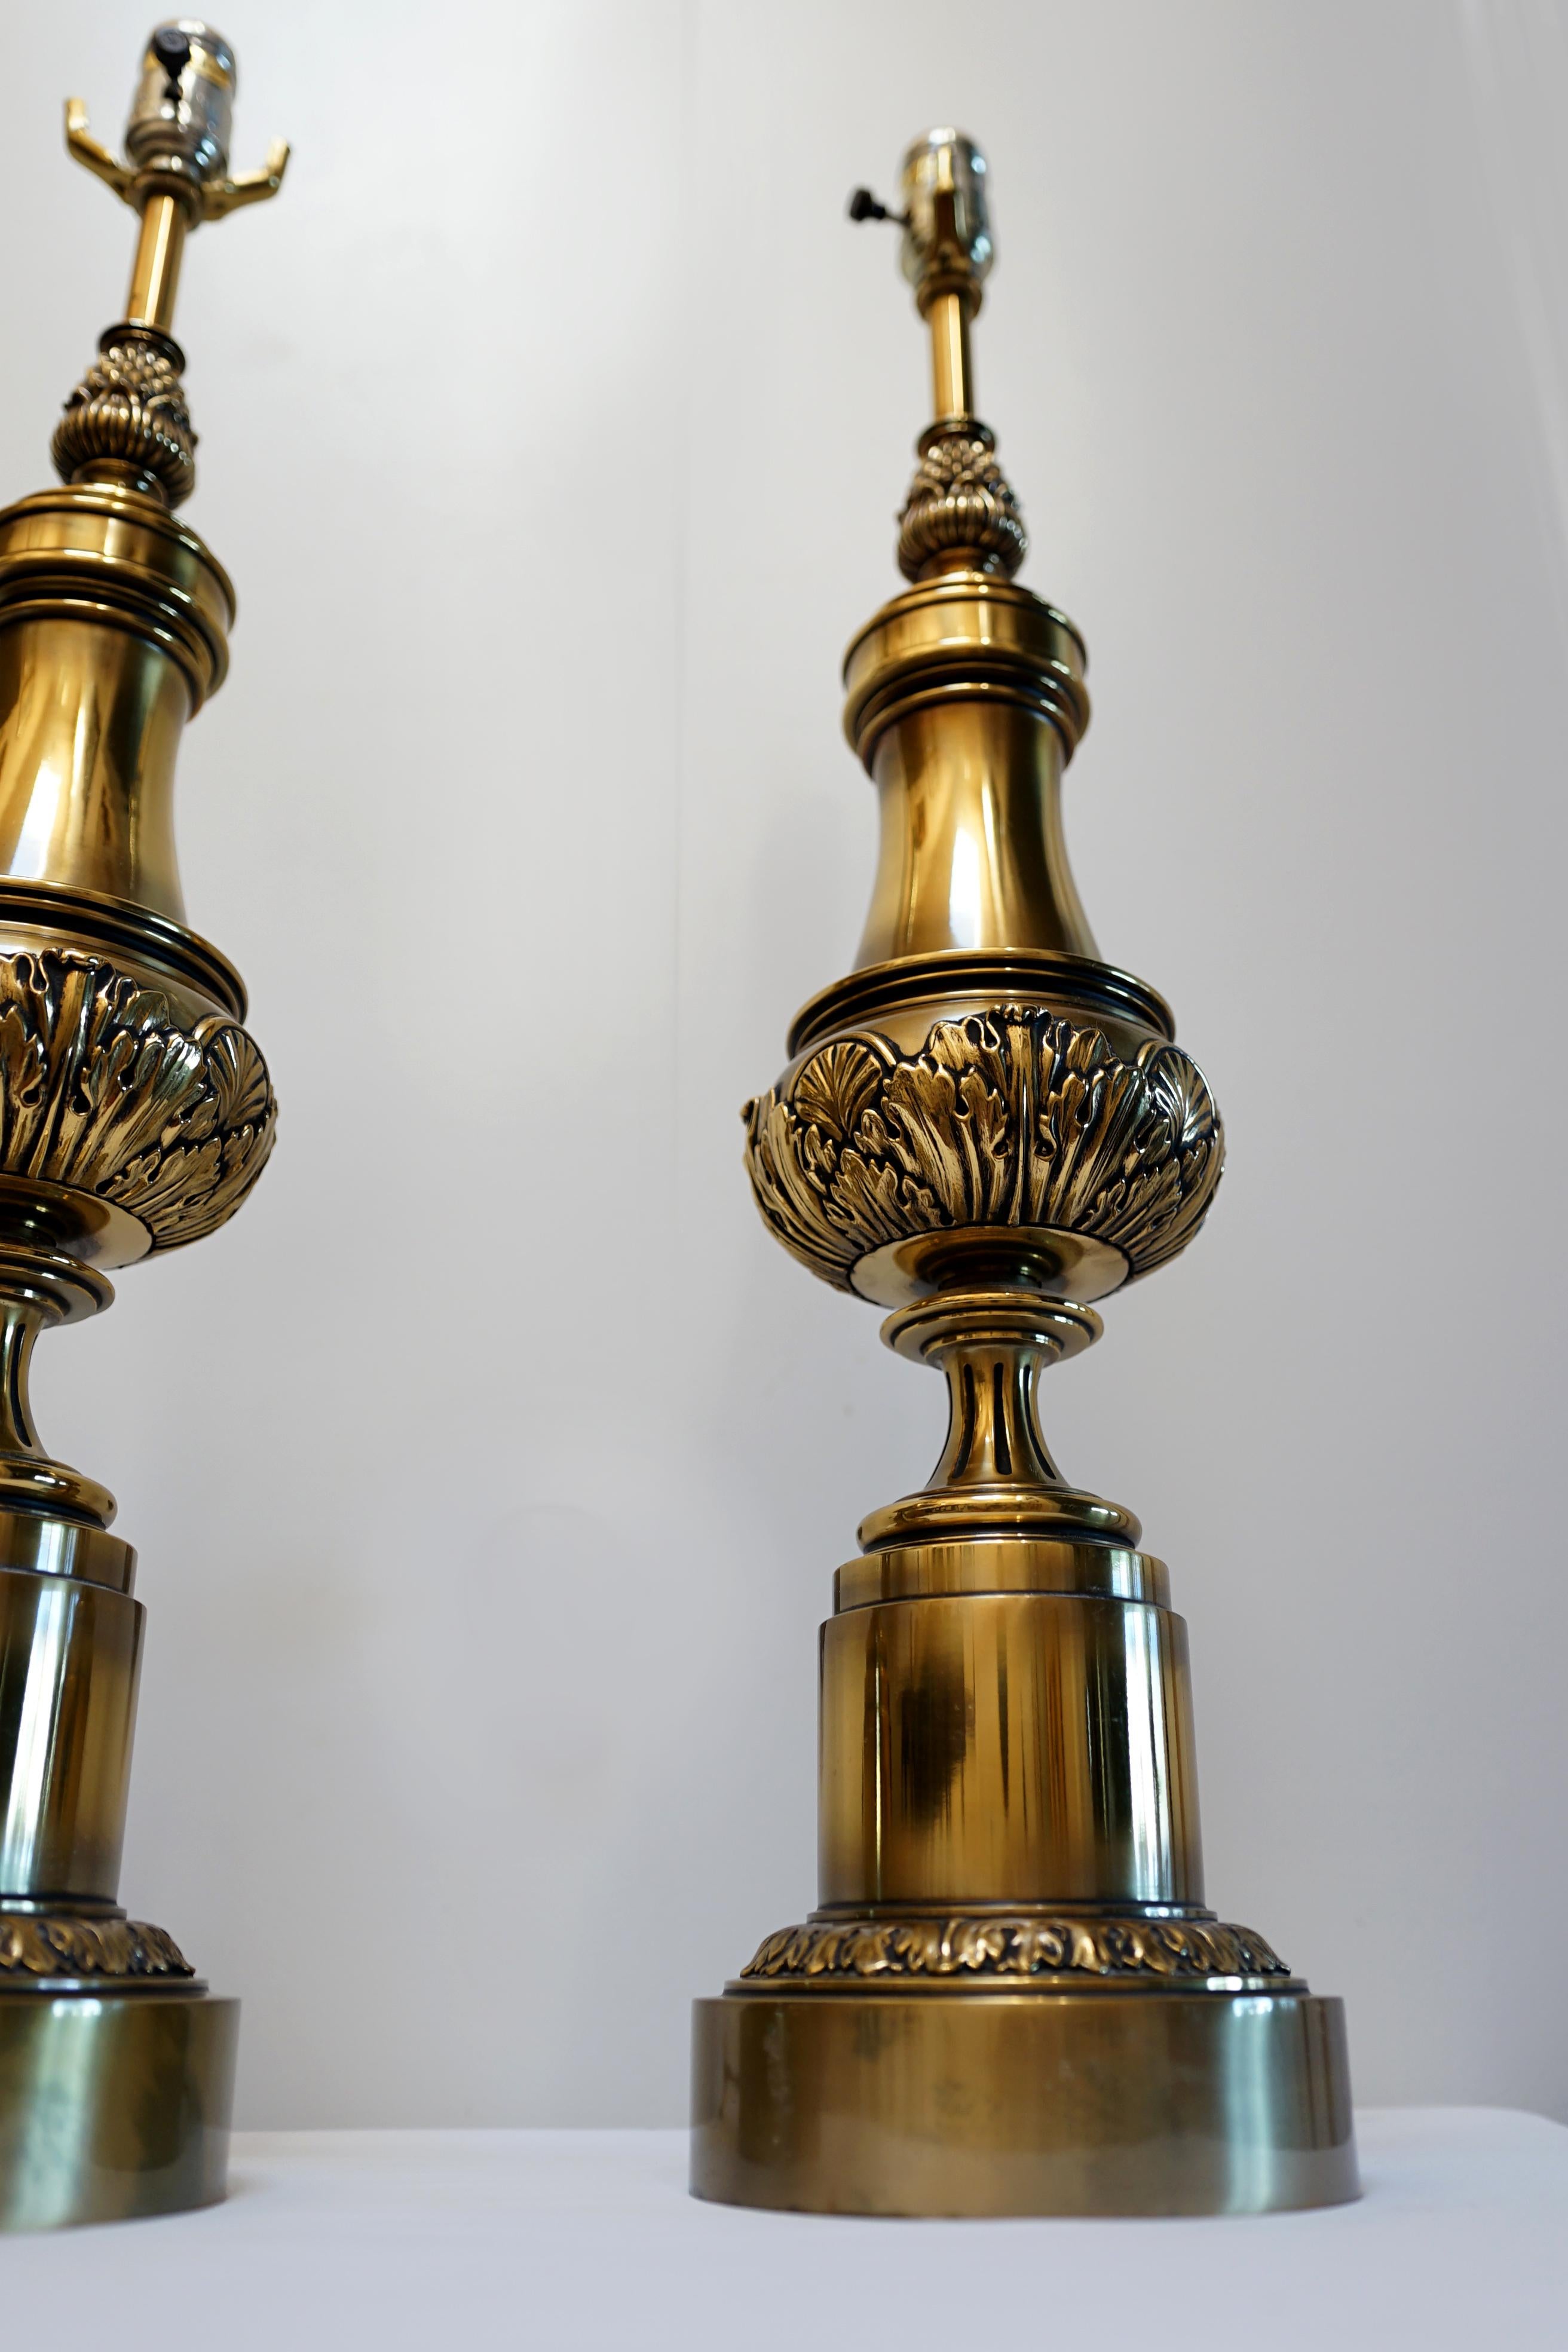 This is an extraordinary pair of Stiffel lamps in size, design and presence. The pair are vintage Stiffel brass columnar lamps from the mid to late 20th Century. They are a decorating asset. There is a vintage feel, but the execution and condition